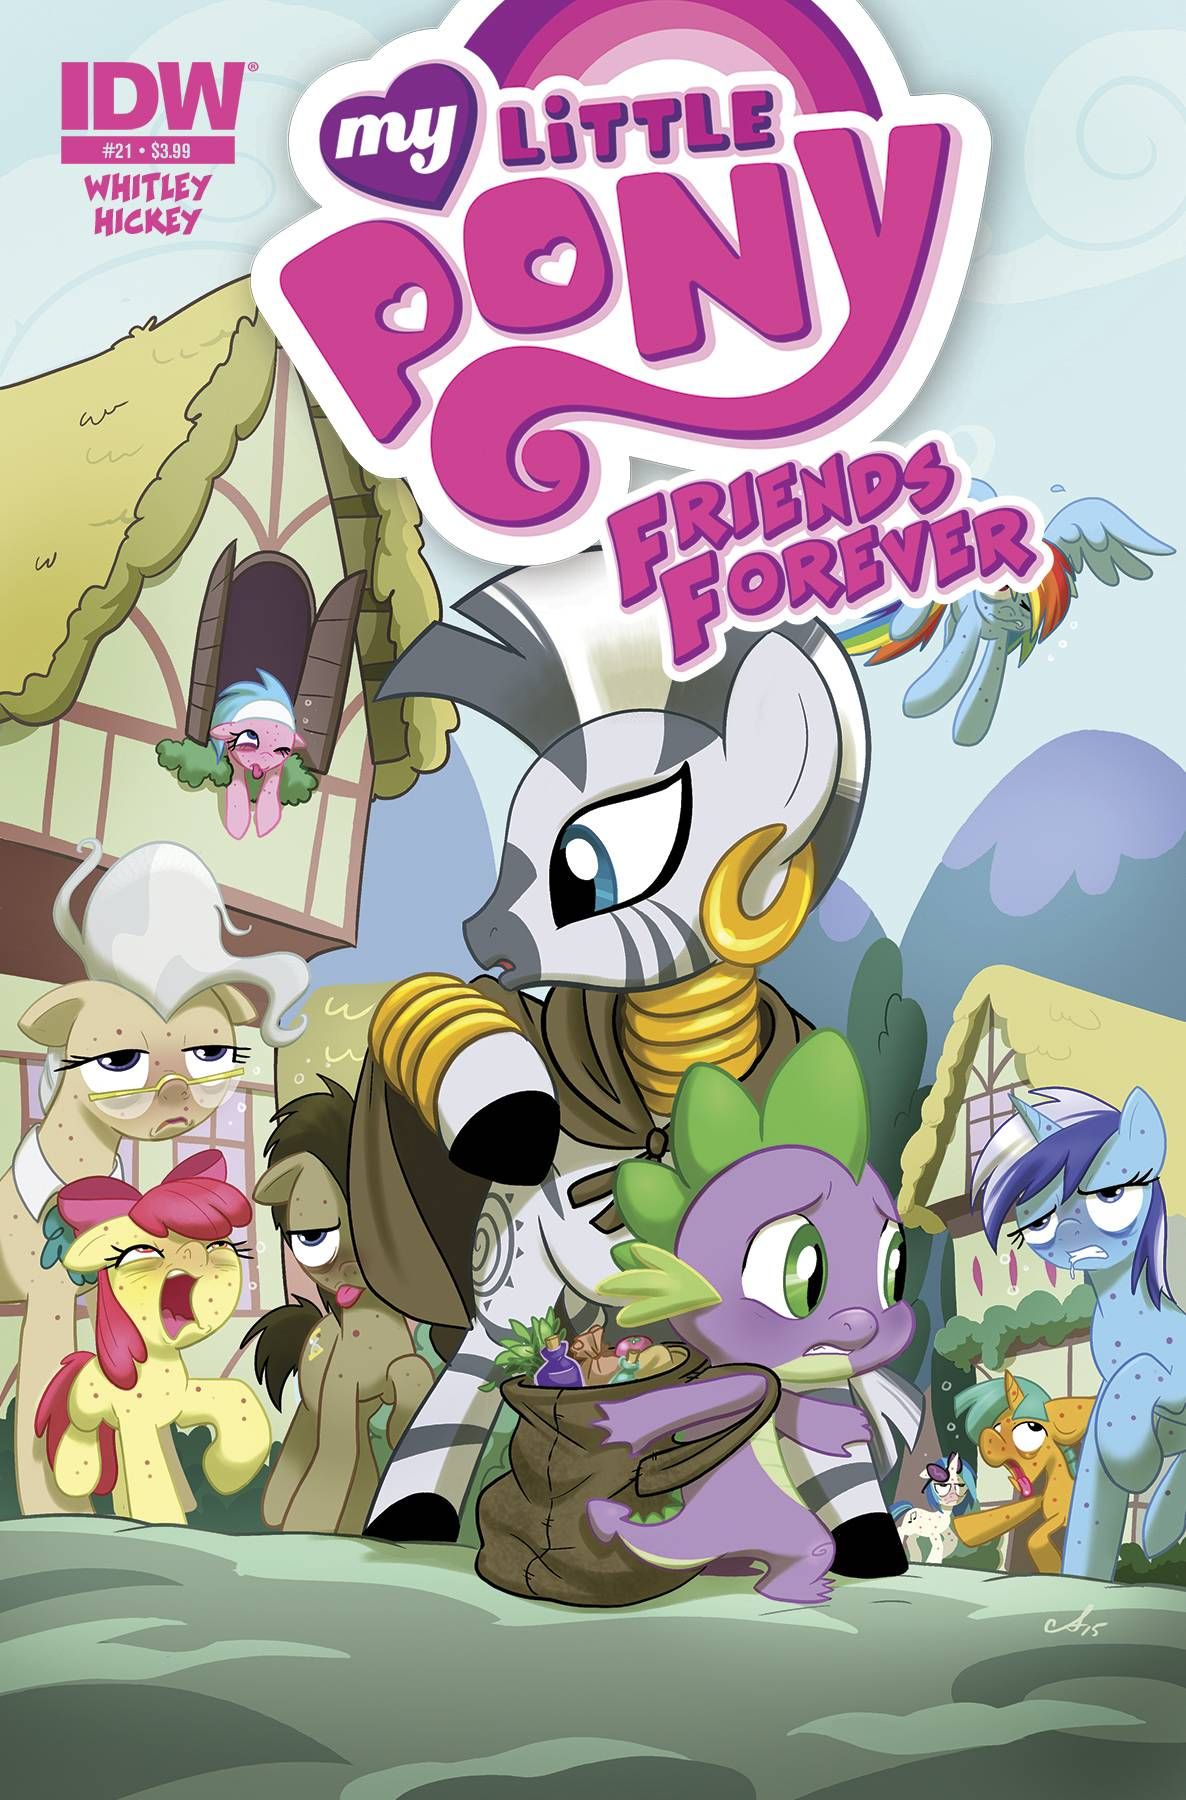 My Little Pony Friends Forever #21 Comic